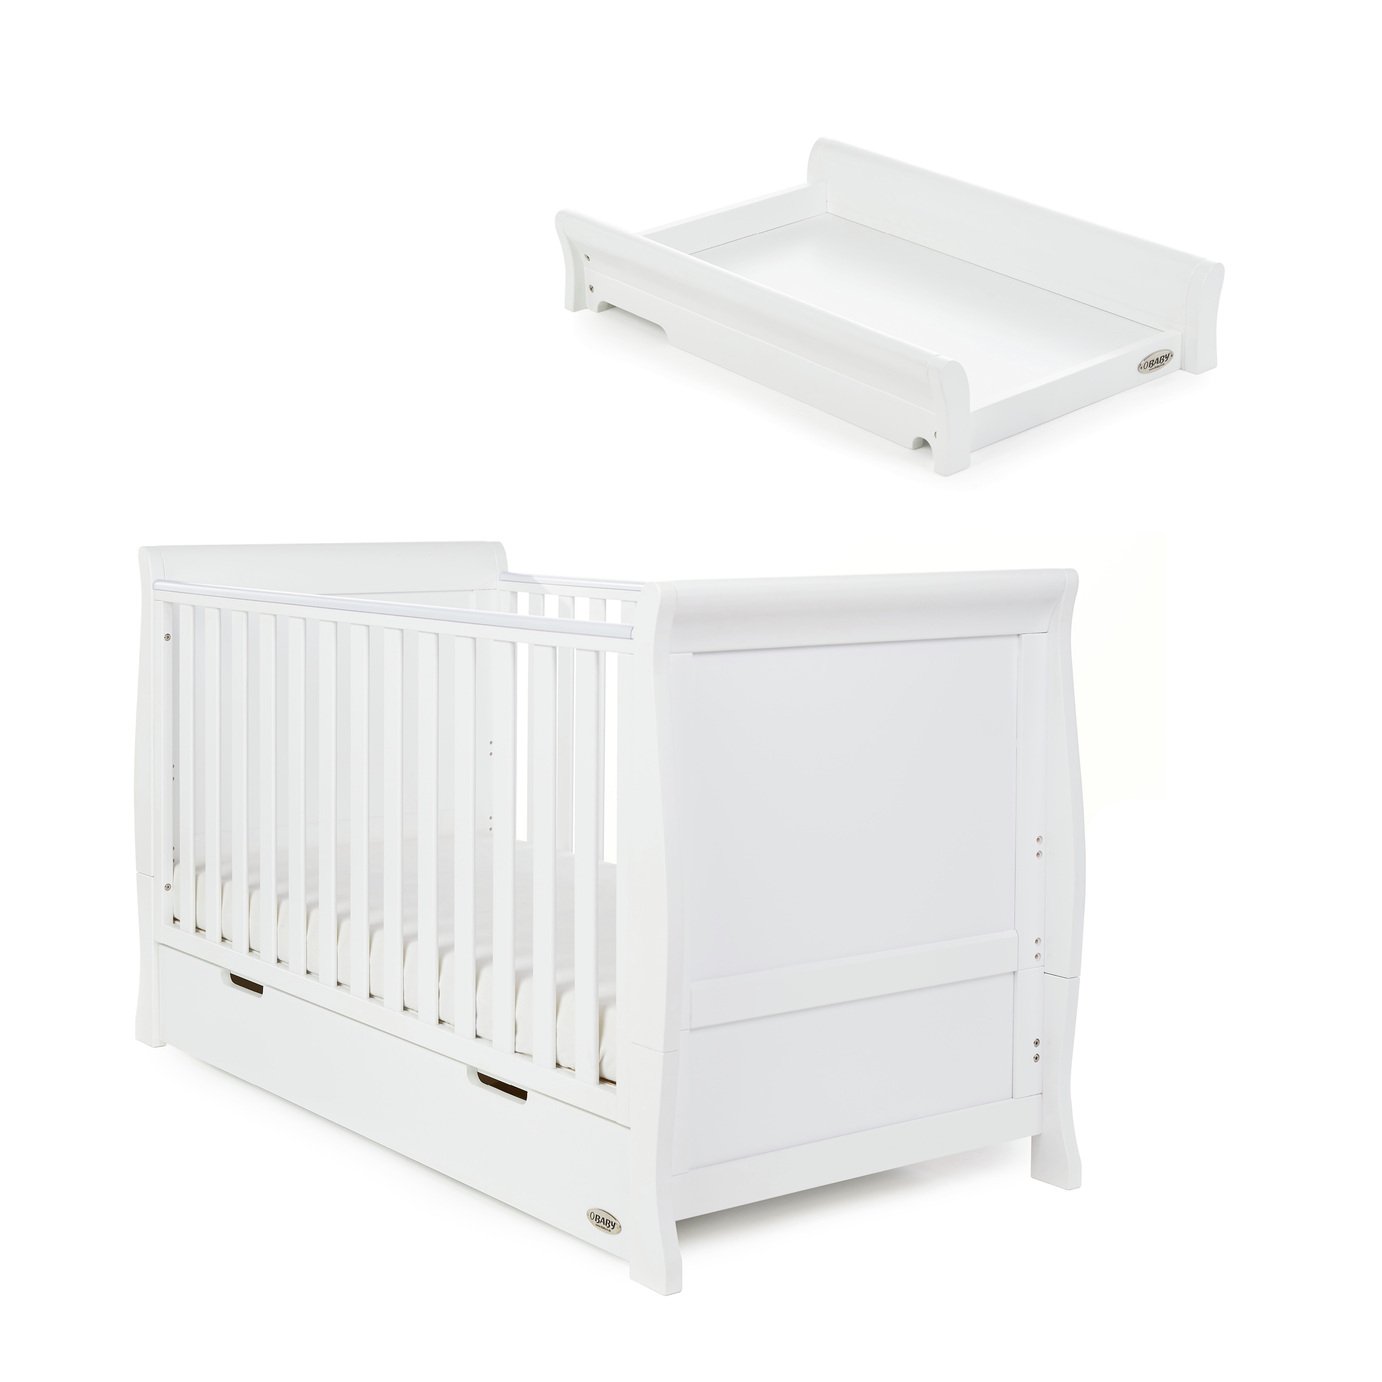 Obaby Stamford Classic Sleigh Cot Bed & Top Changer - White